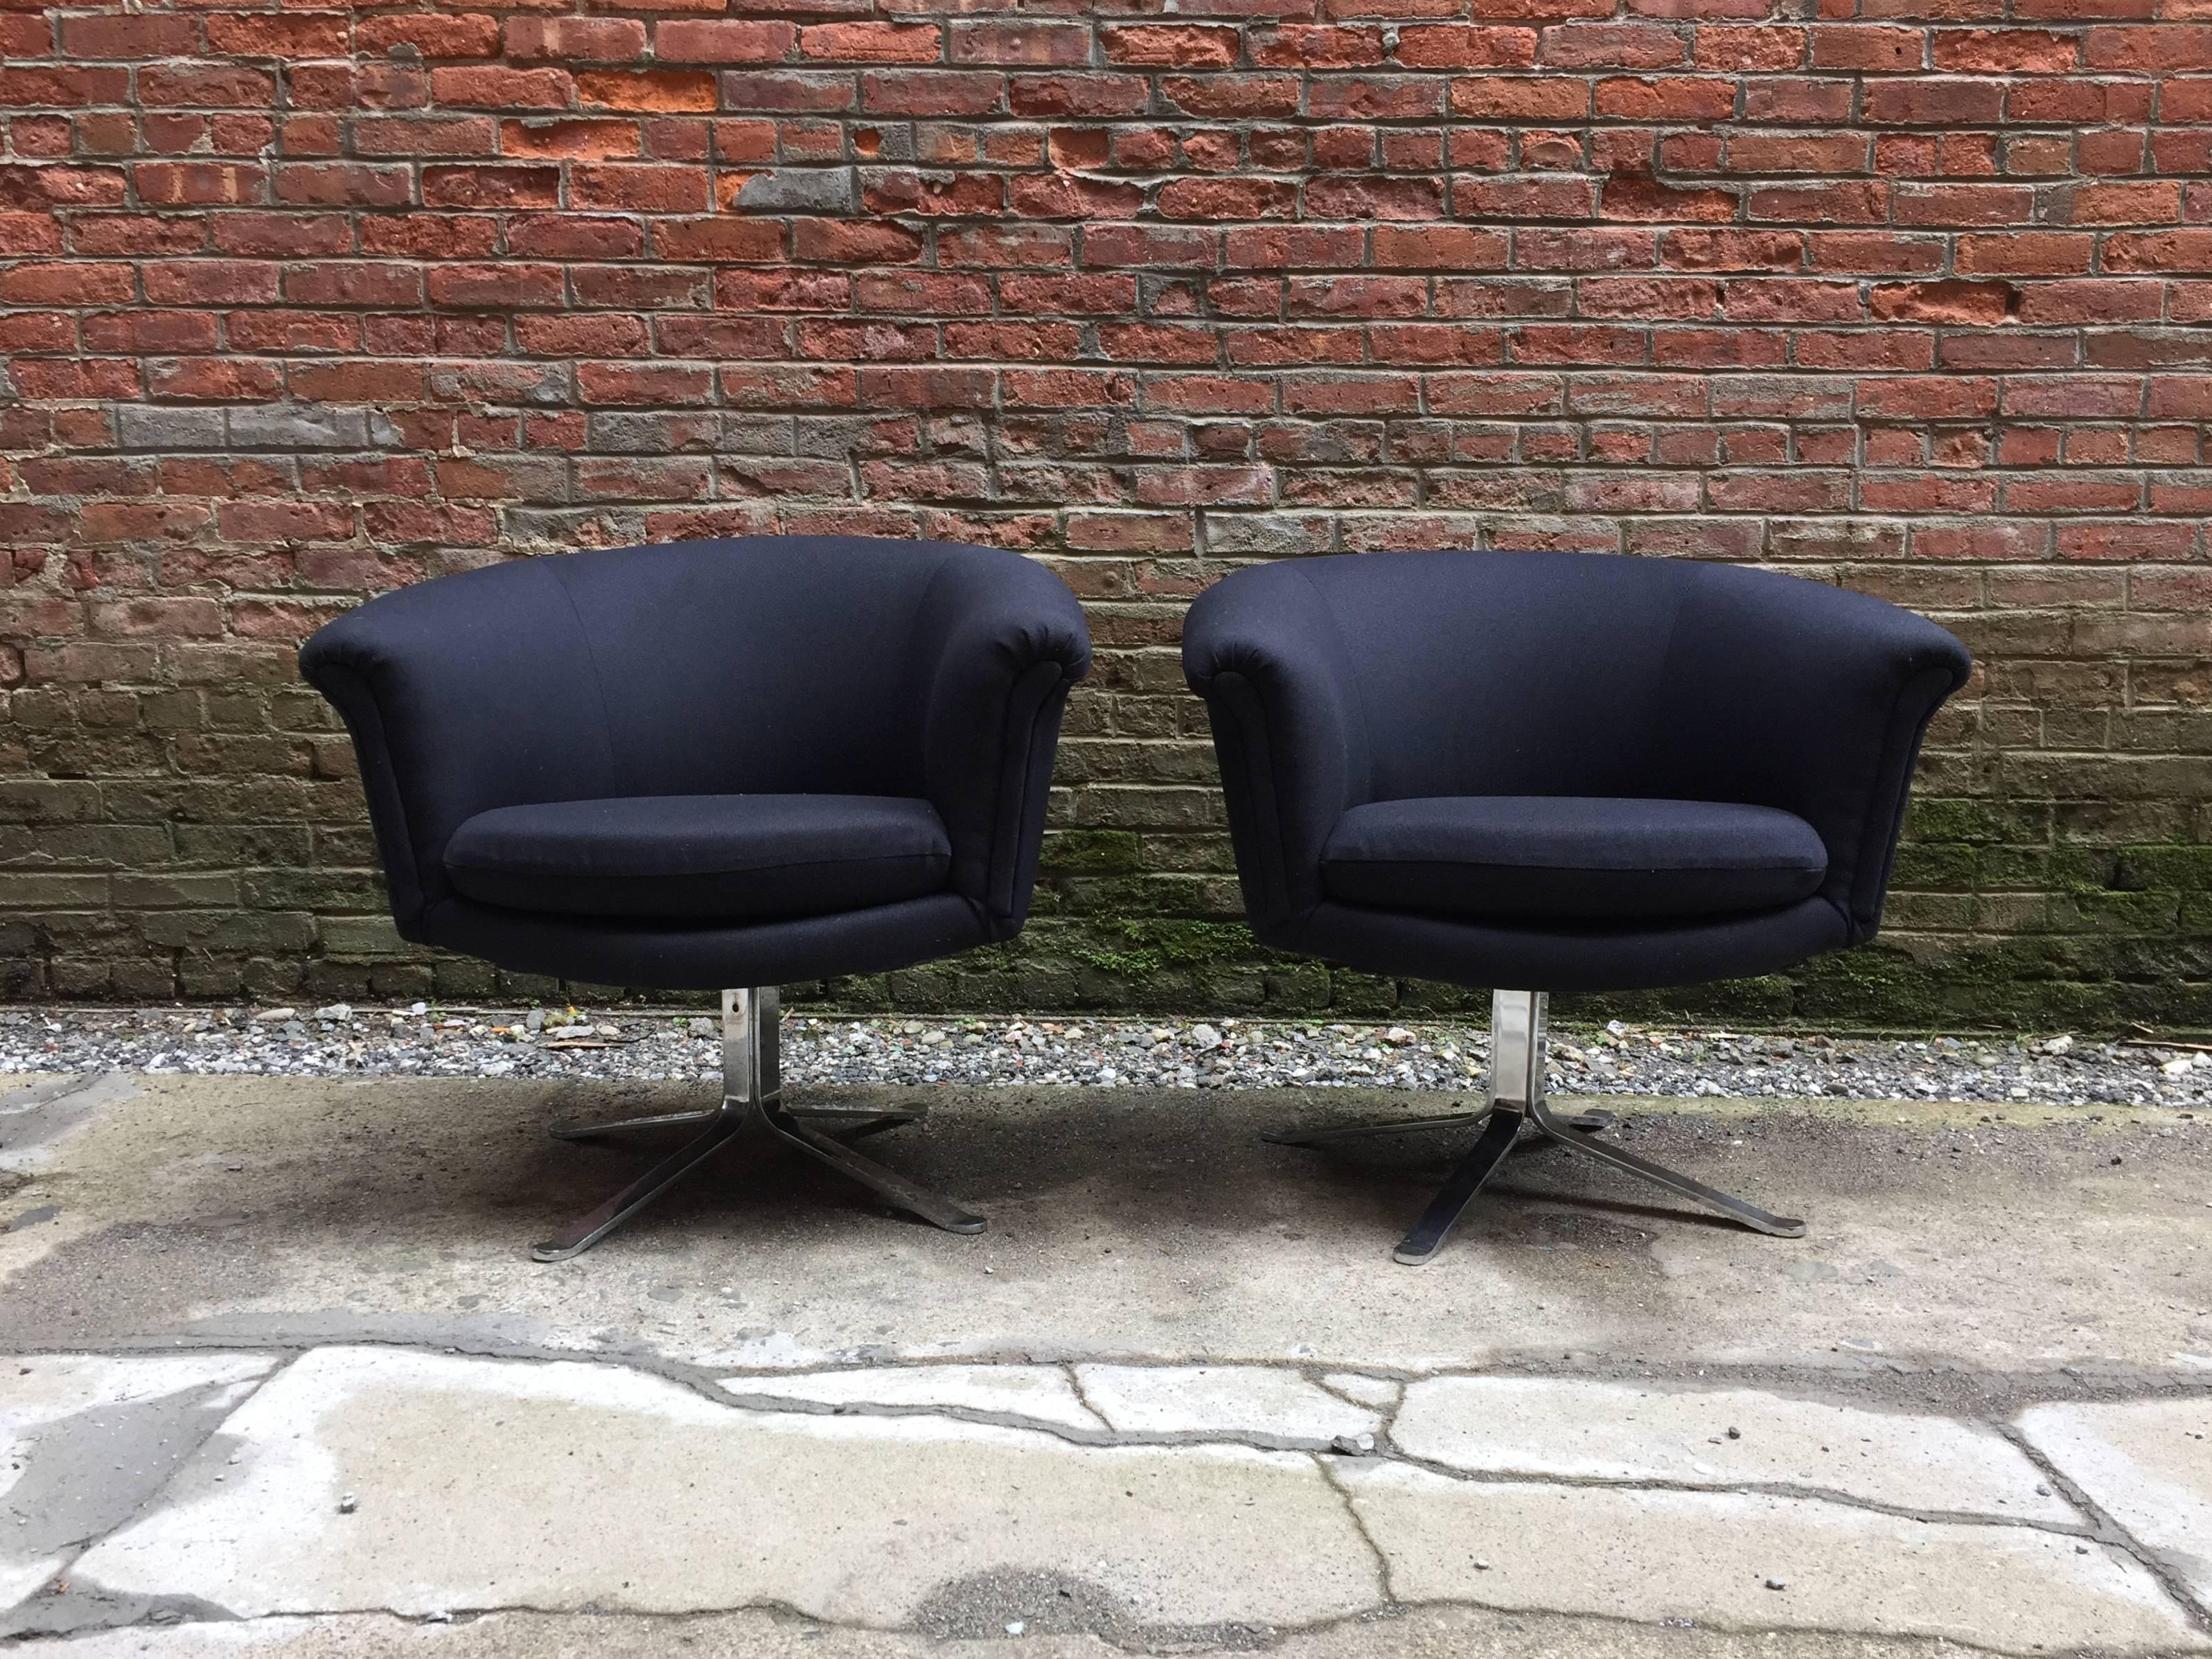 Designed by Nicos Zographos. Re-upholstered in Knoll Hourglass Caviar fabric ( black fabric with a hint of gray). Flat bar chromed steel bases, circa 1970.